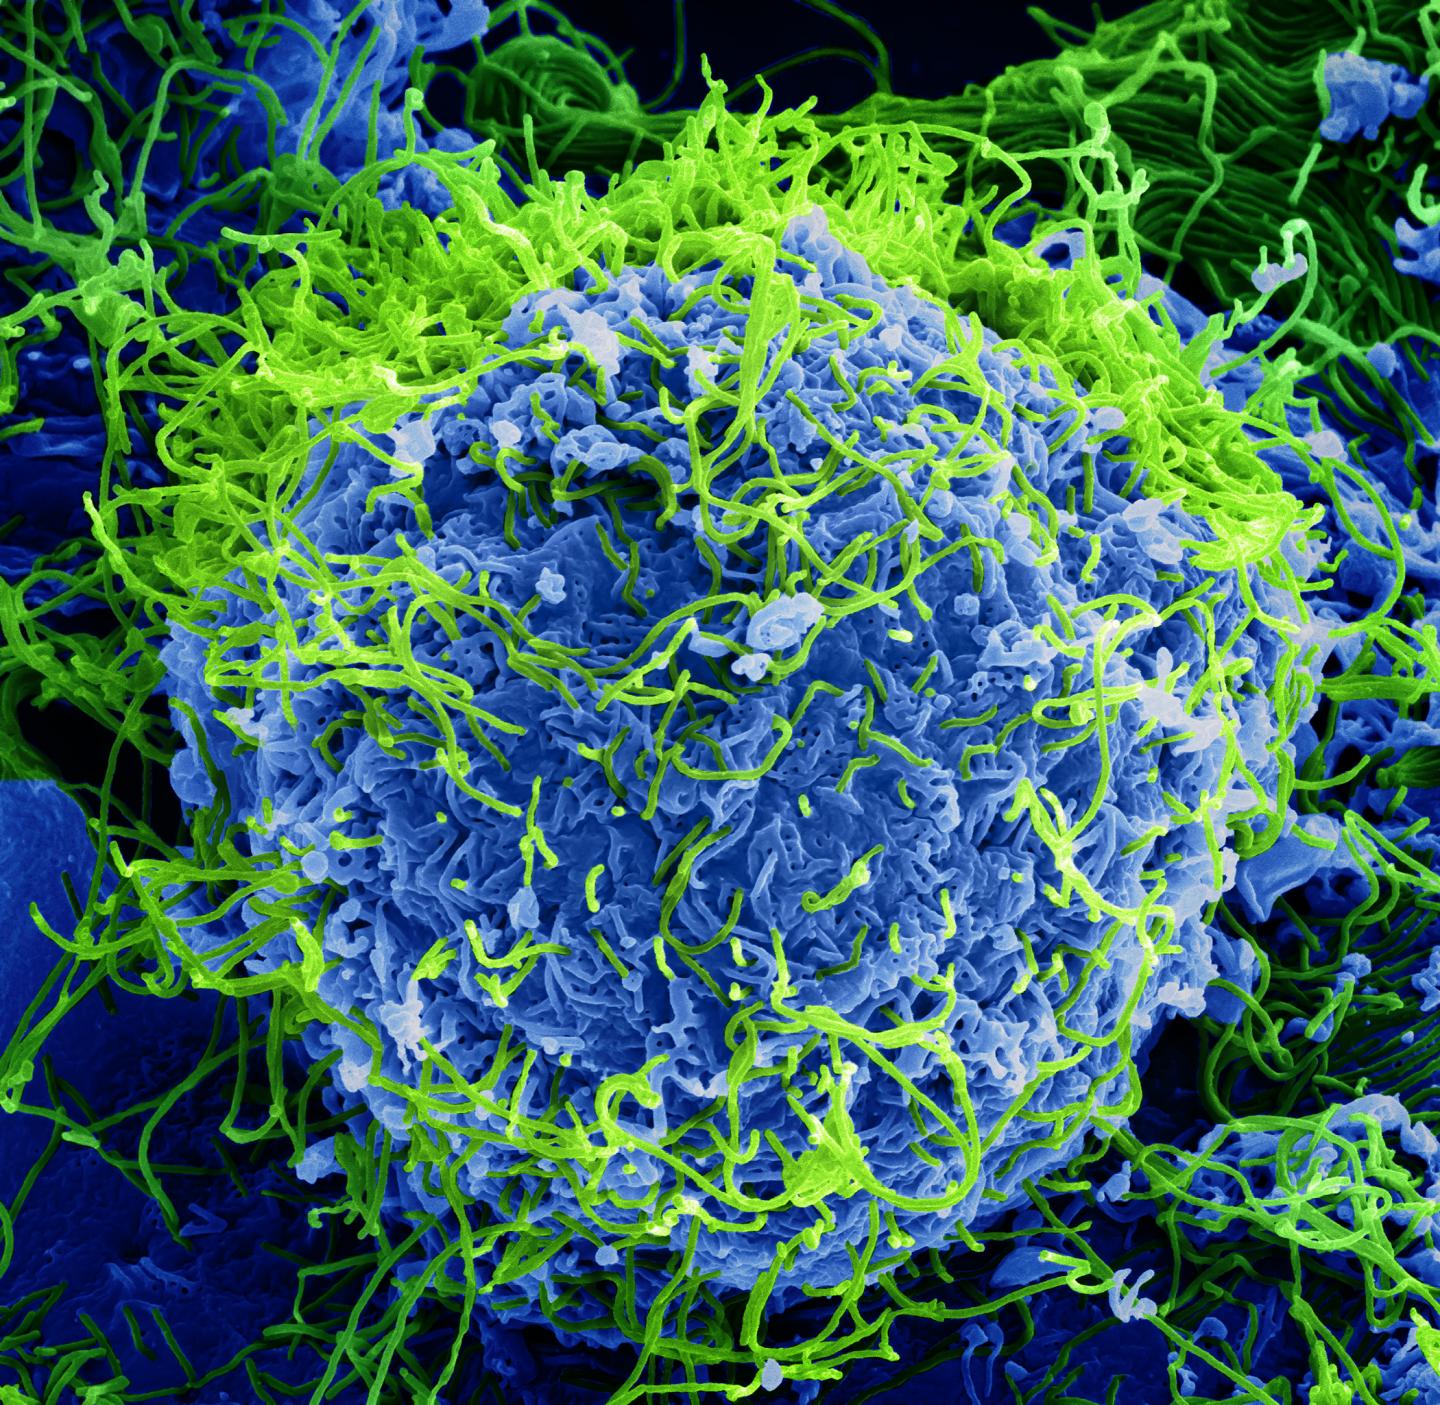 Colorized Scanning Electron Micrograph of Ebola Virus Particles